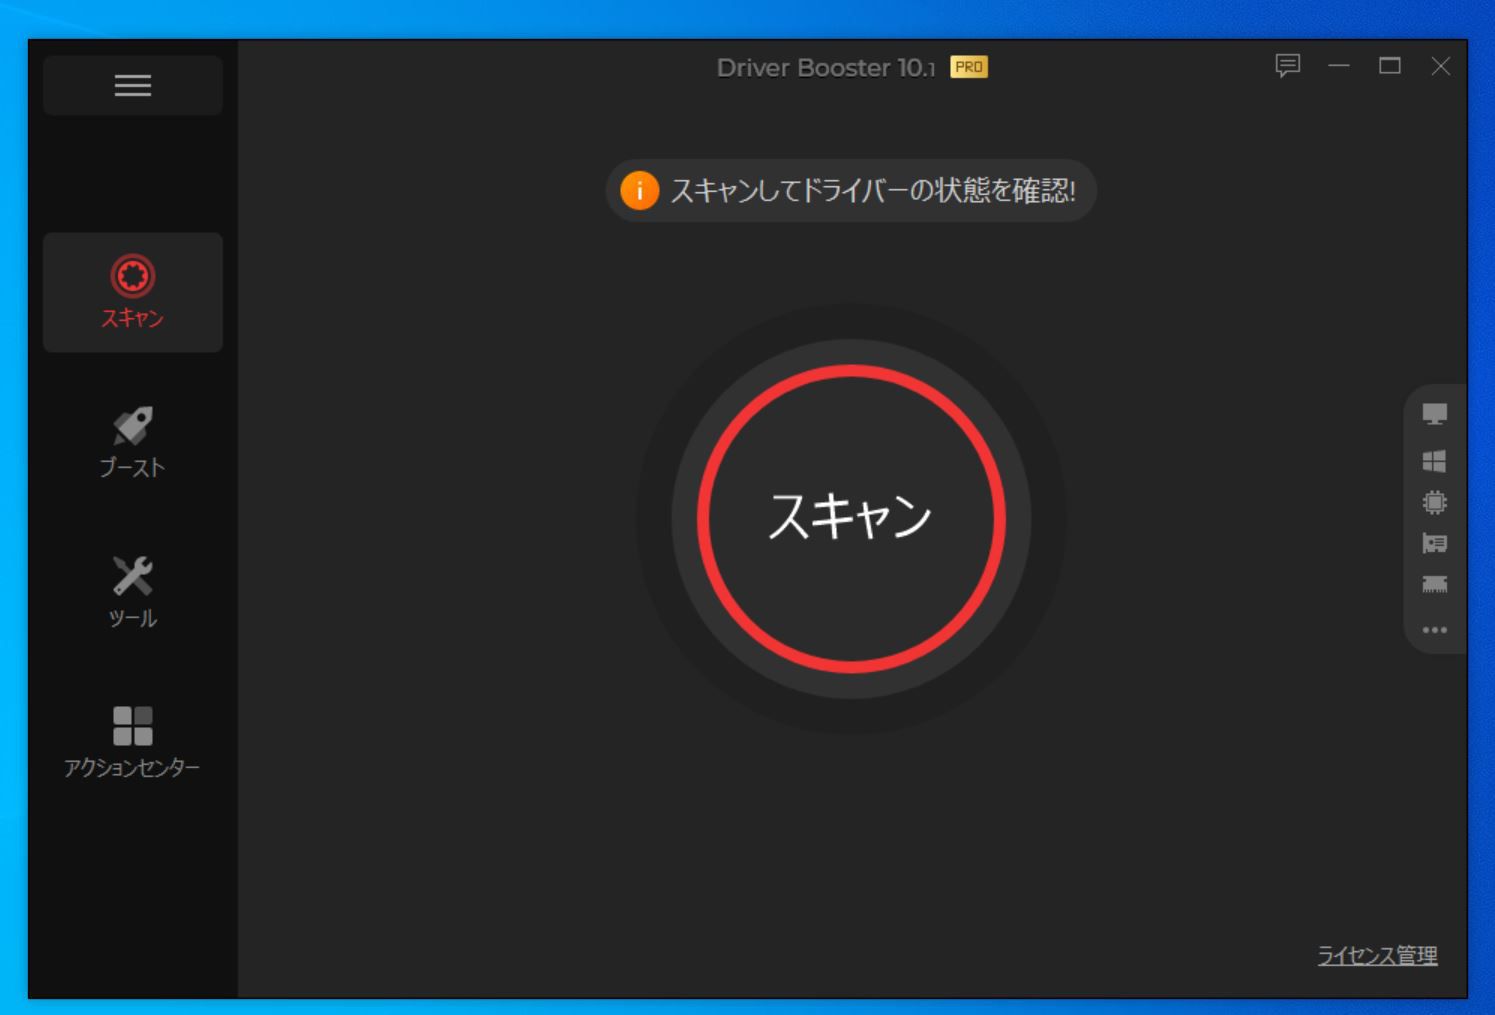 Driver Booster 10 PROの起動画面